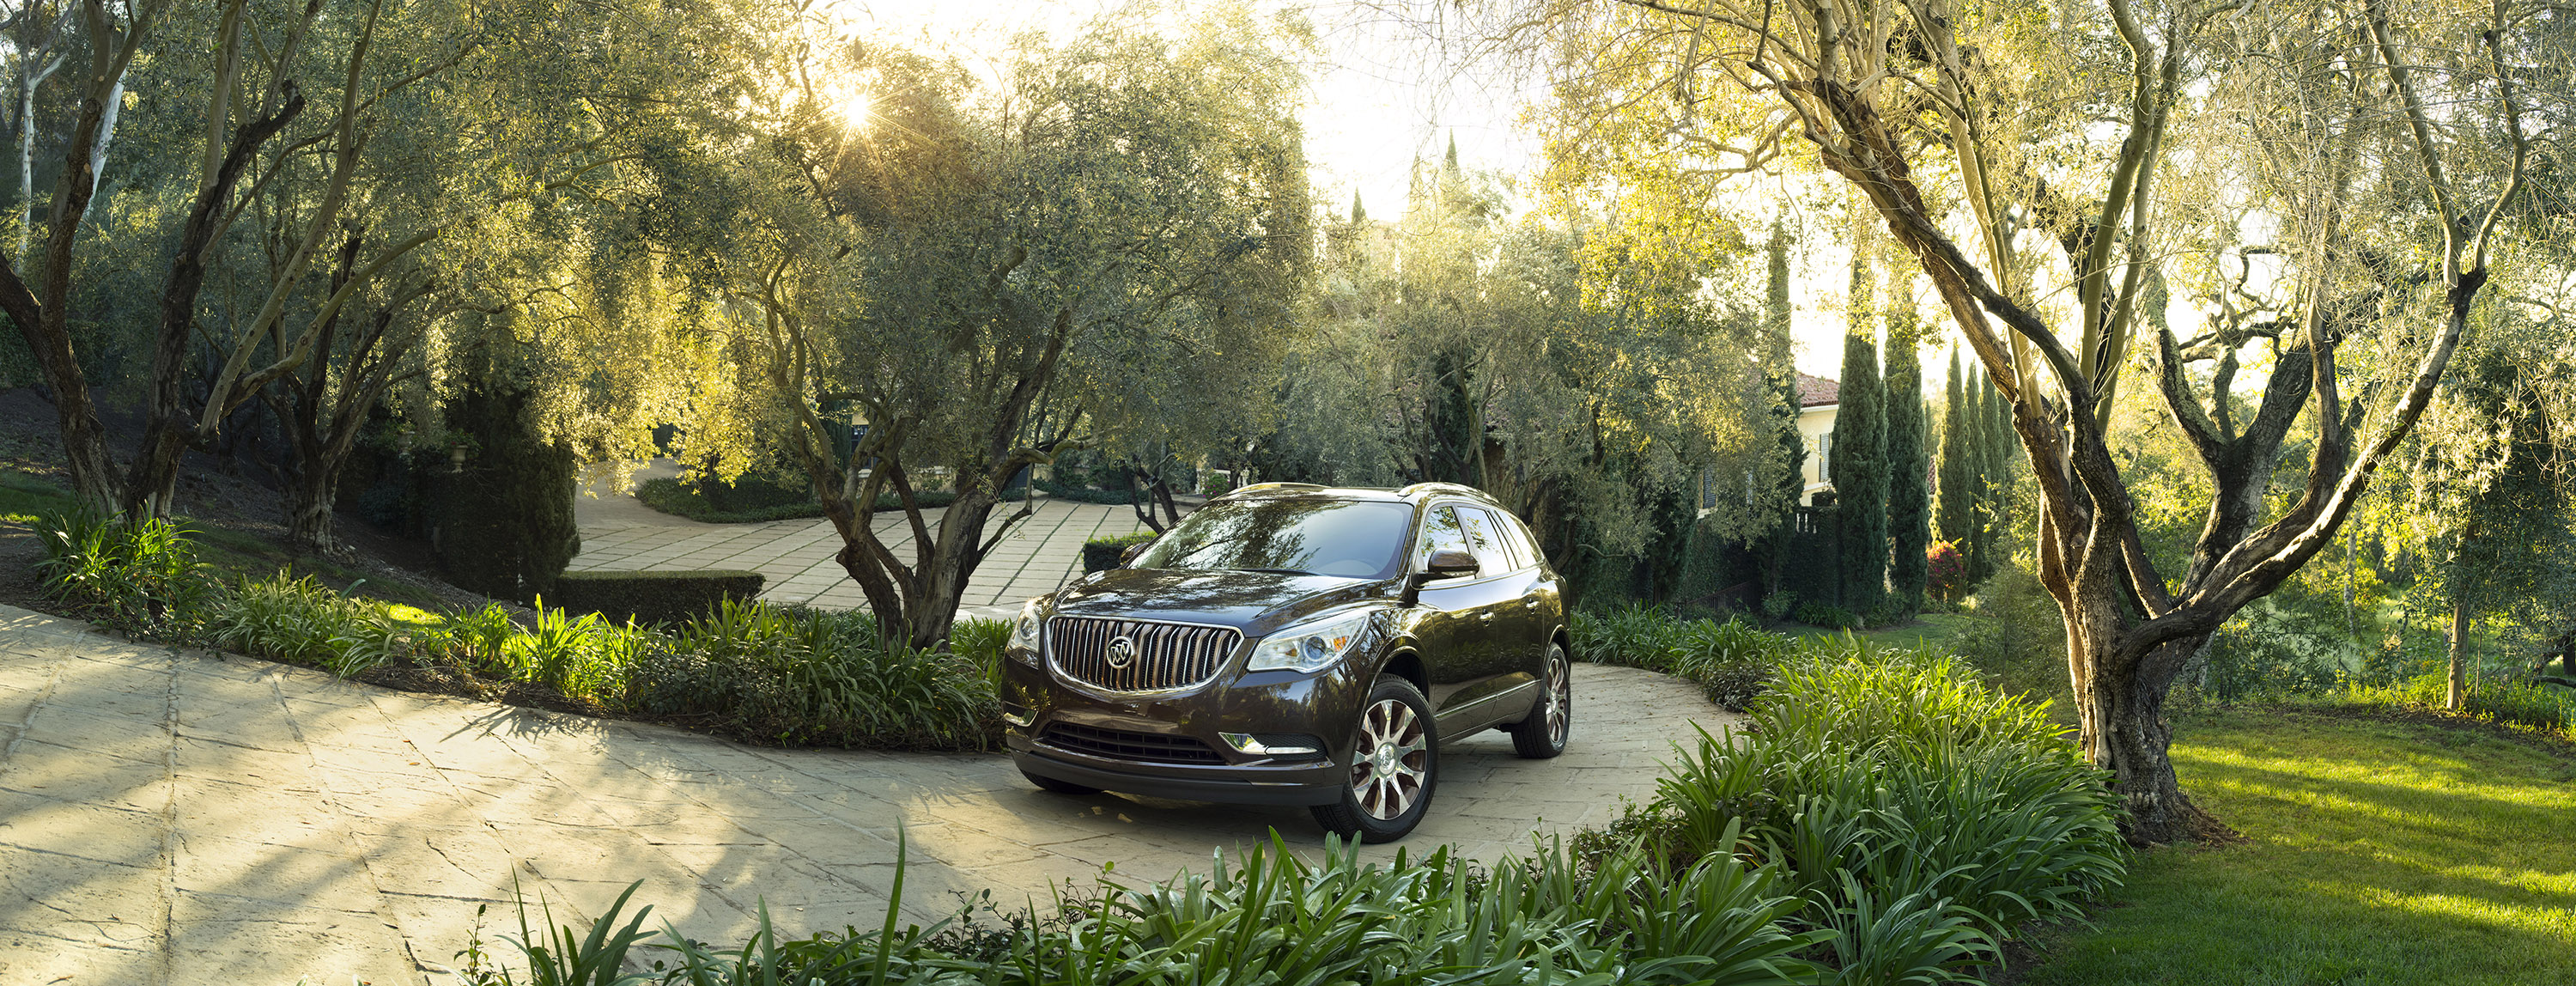 Buick Enclave Tuscan Edition photo #1